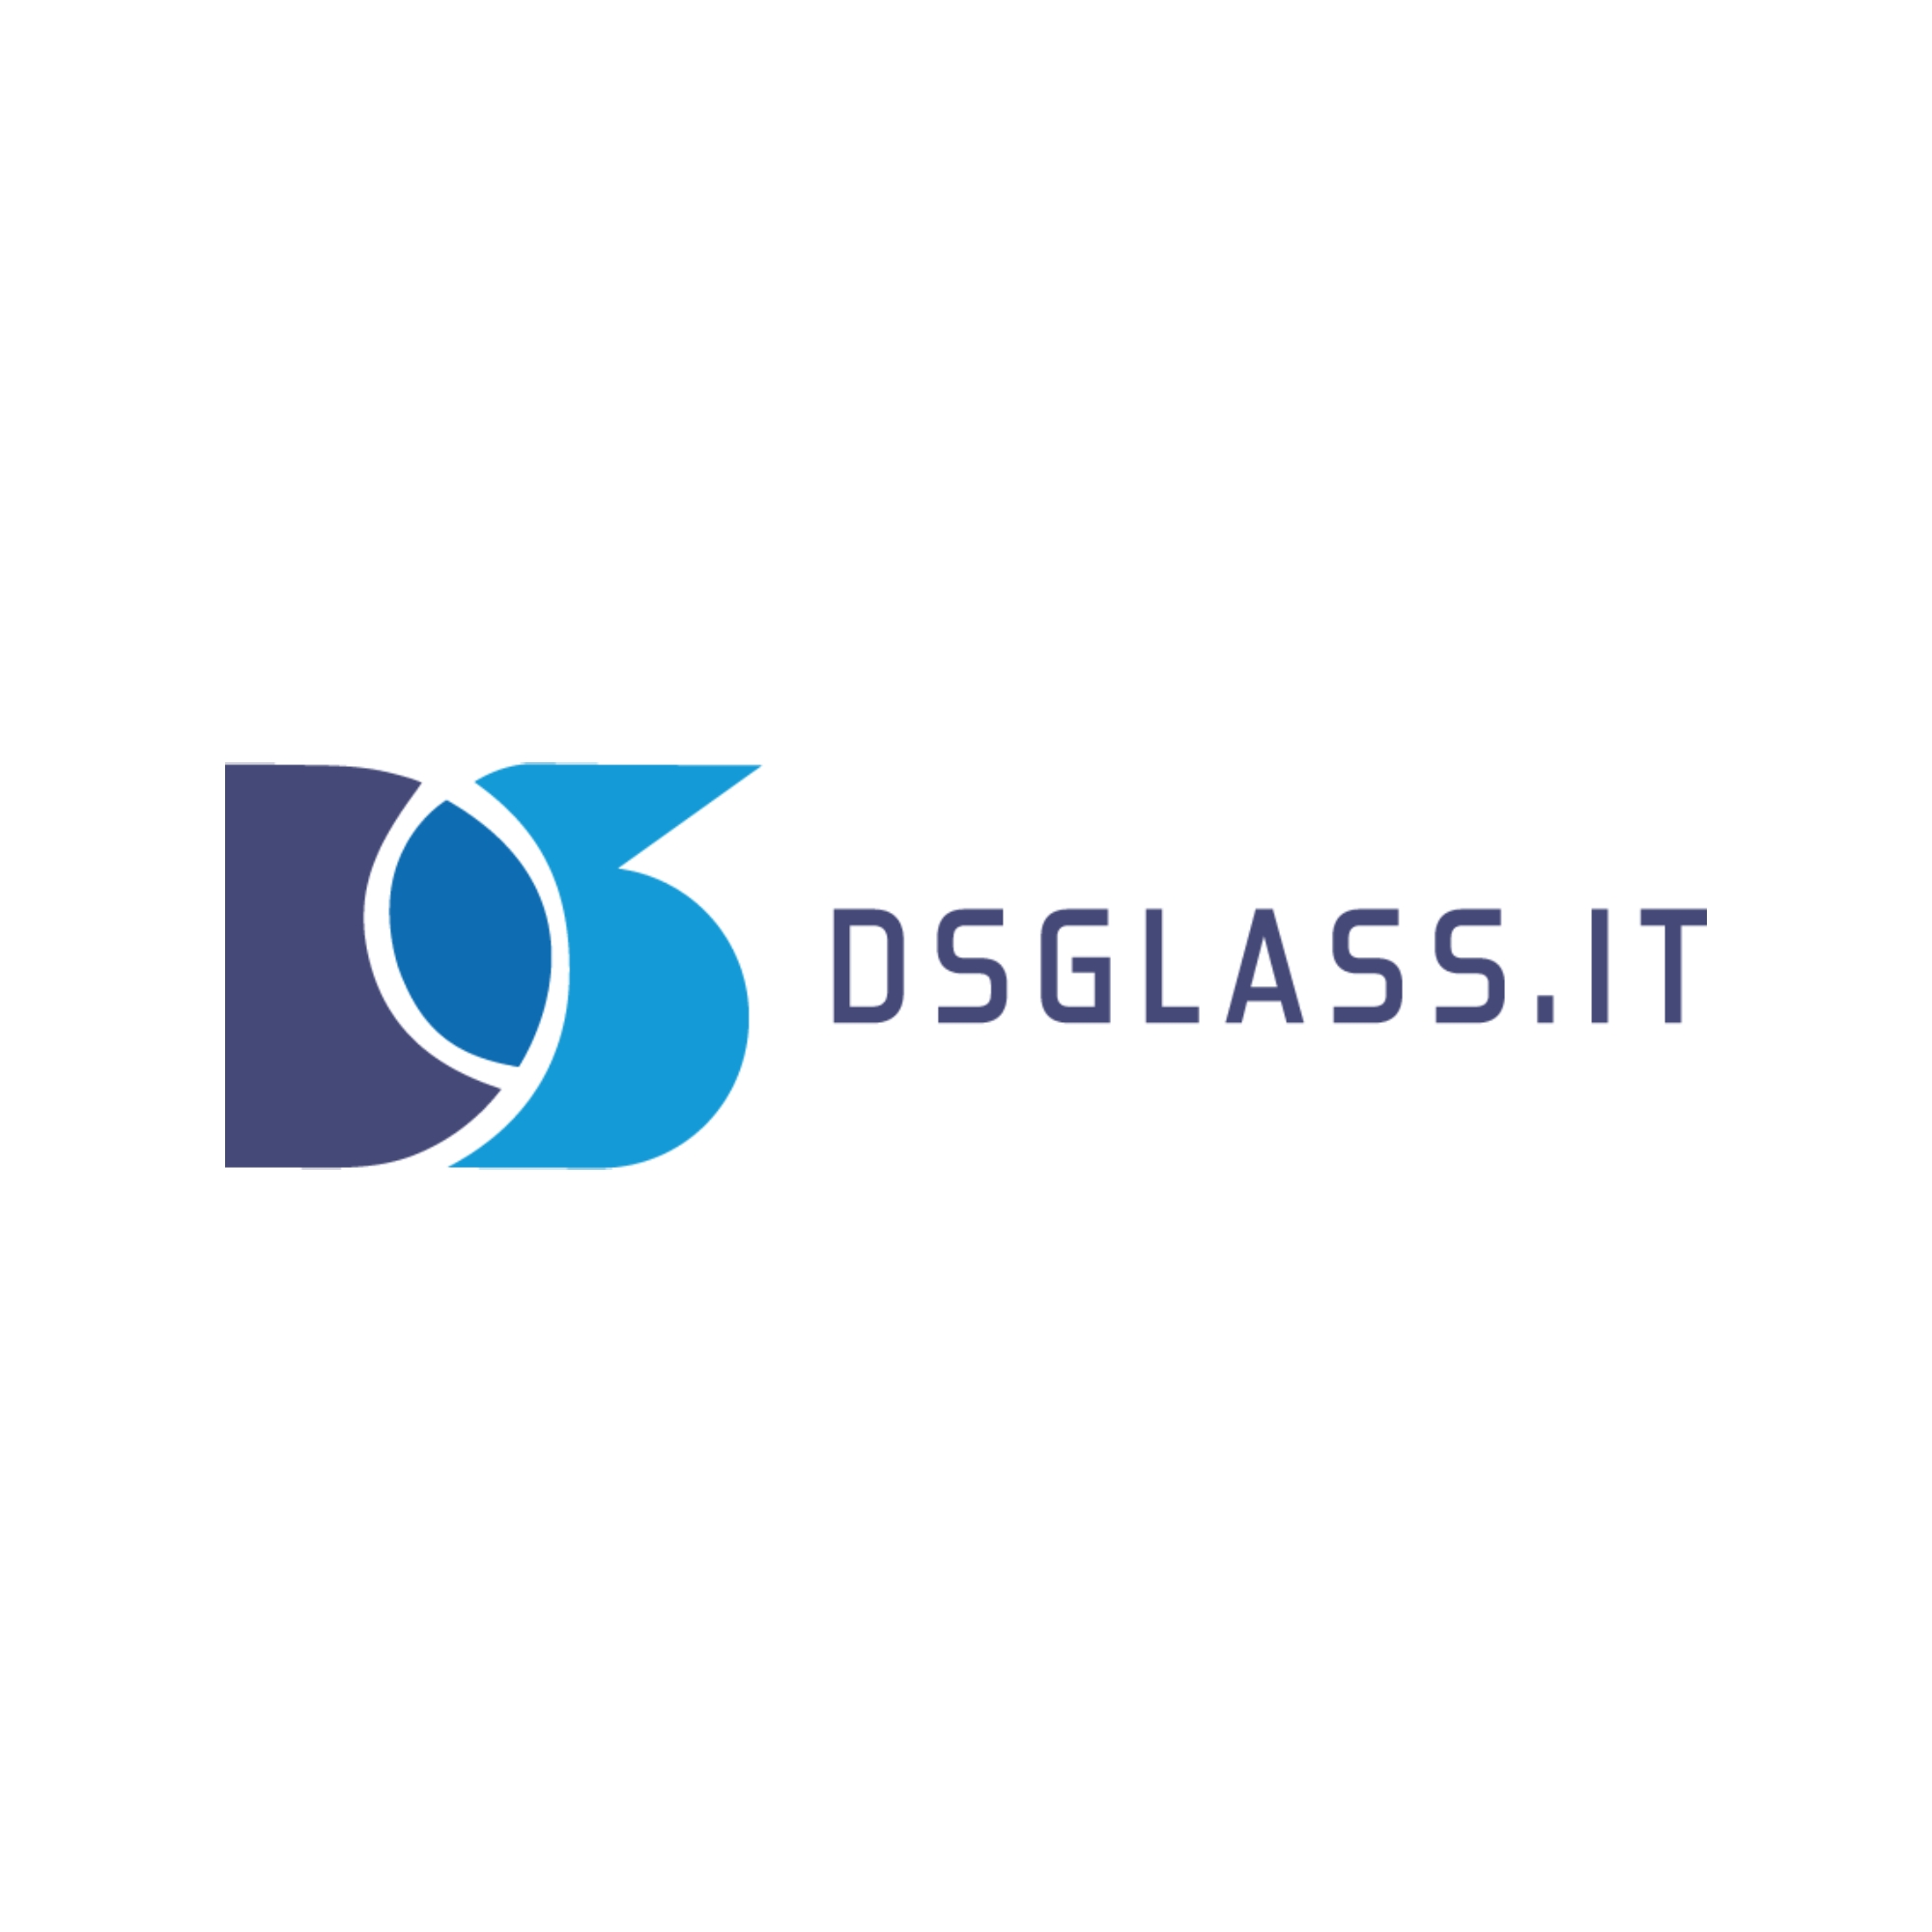 DS Glass